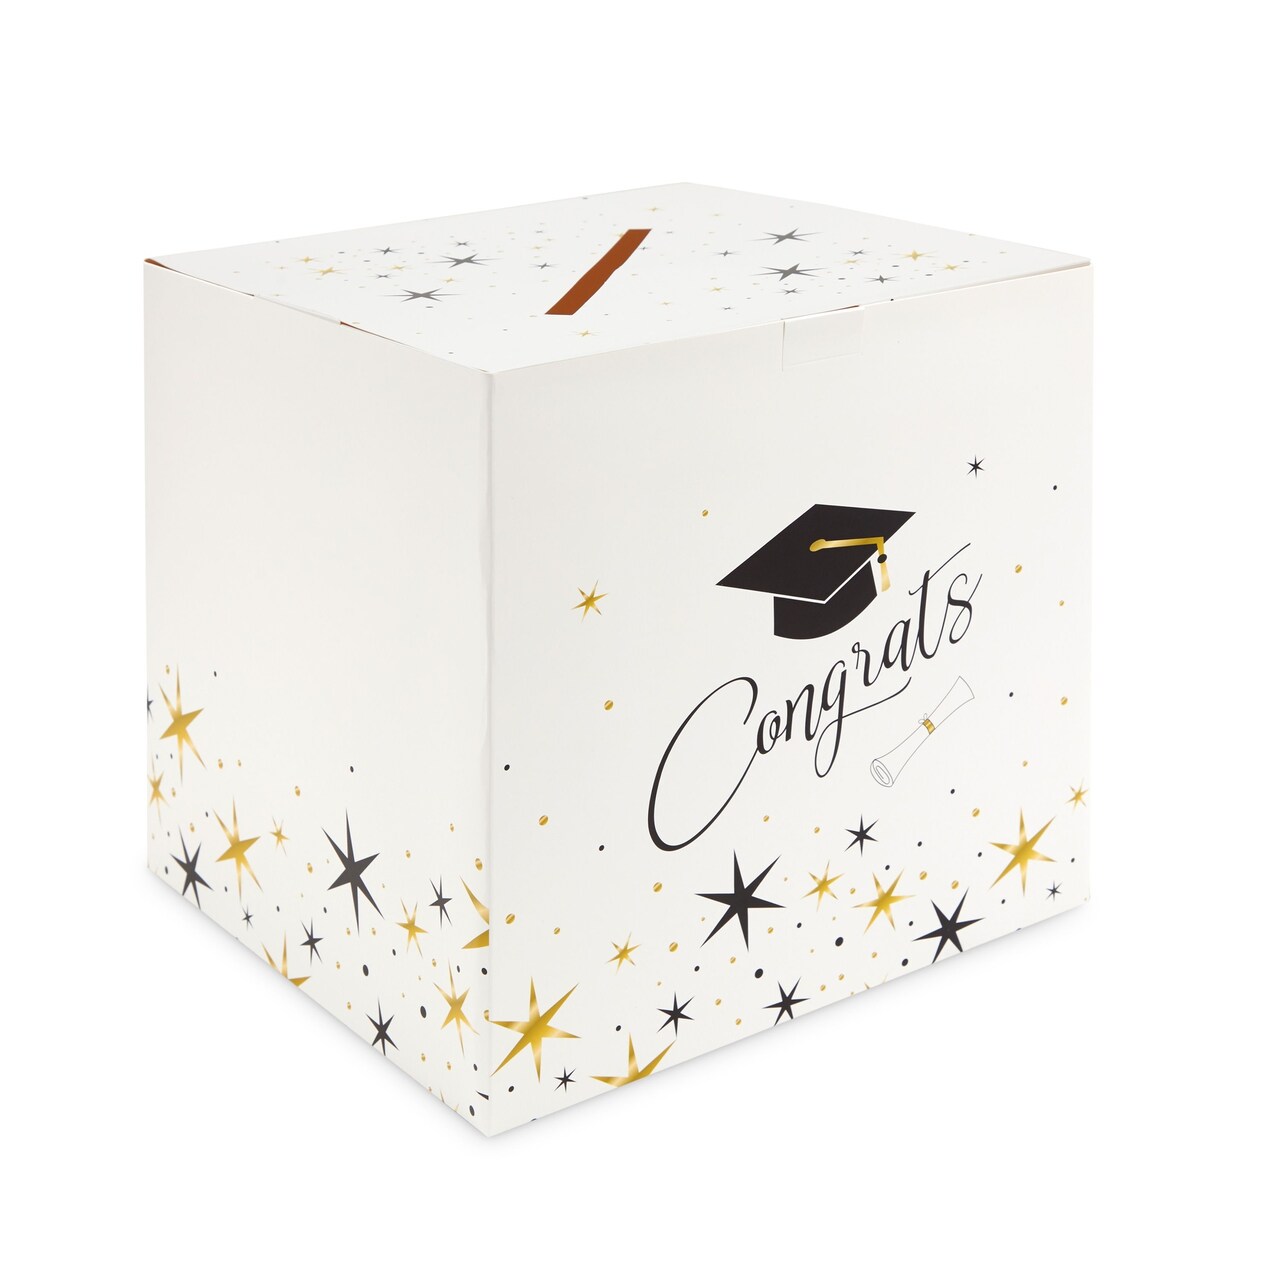 Paper Graduation Card Box Holder for Party Supplies, Favors, Gift Cards, Award Ceremony, High School, College Grad Celebration Decorations (White, 12x12 In)